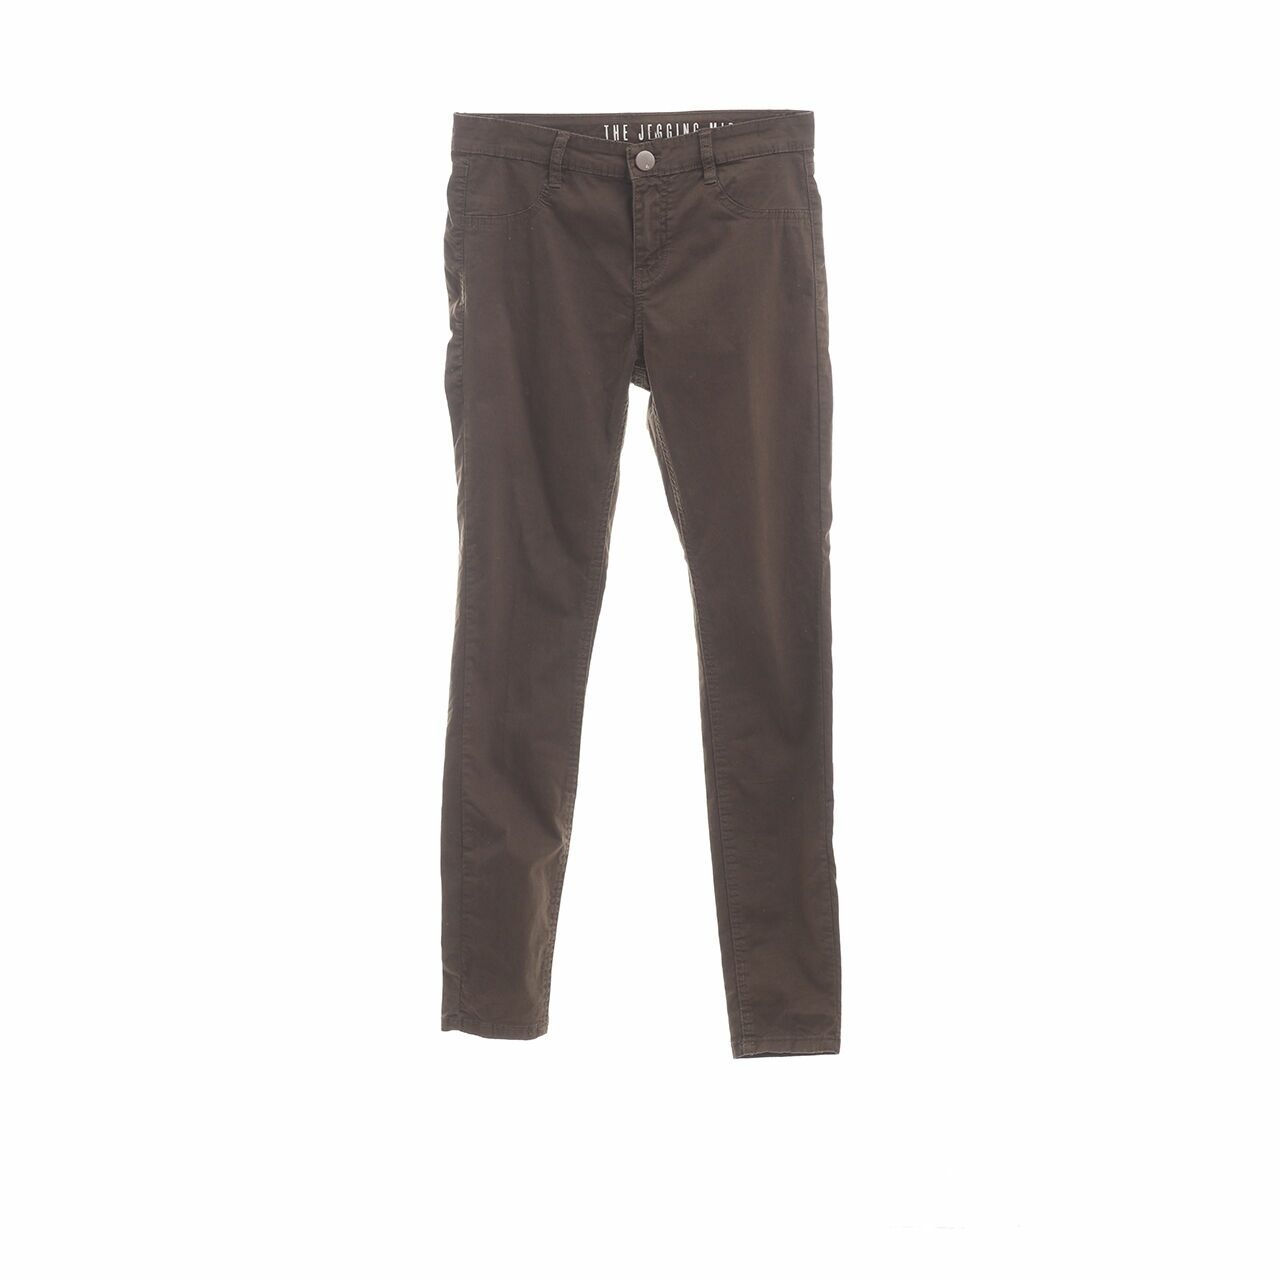 Cotton On Olive Jegging Mid Rise Long Pants